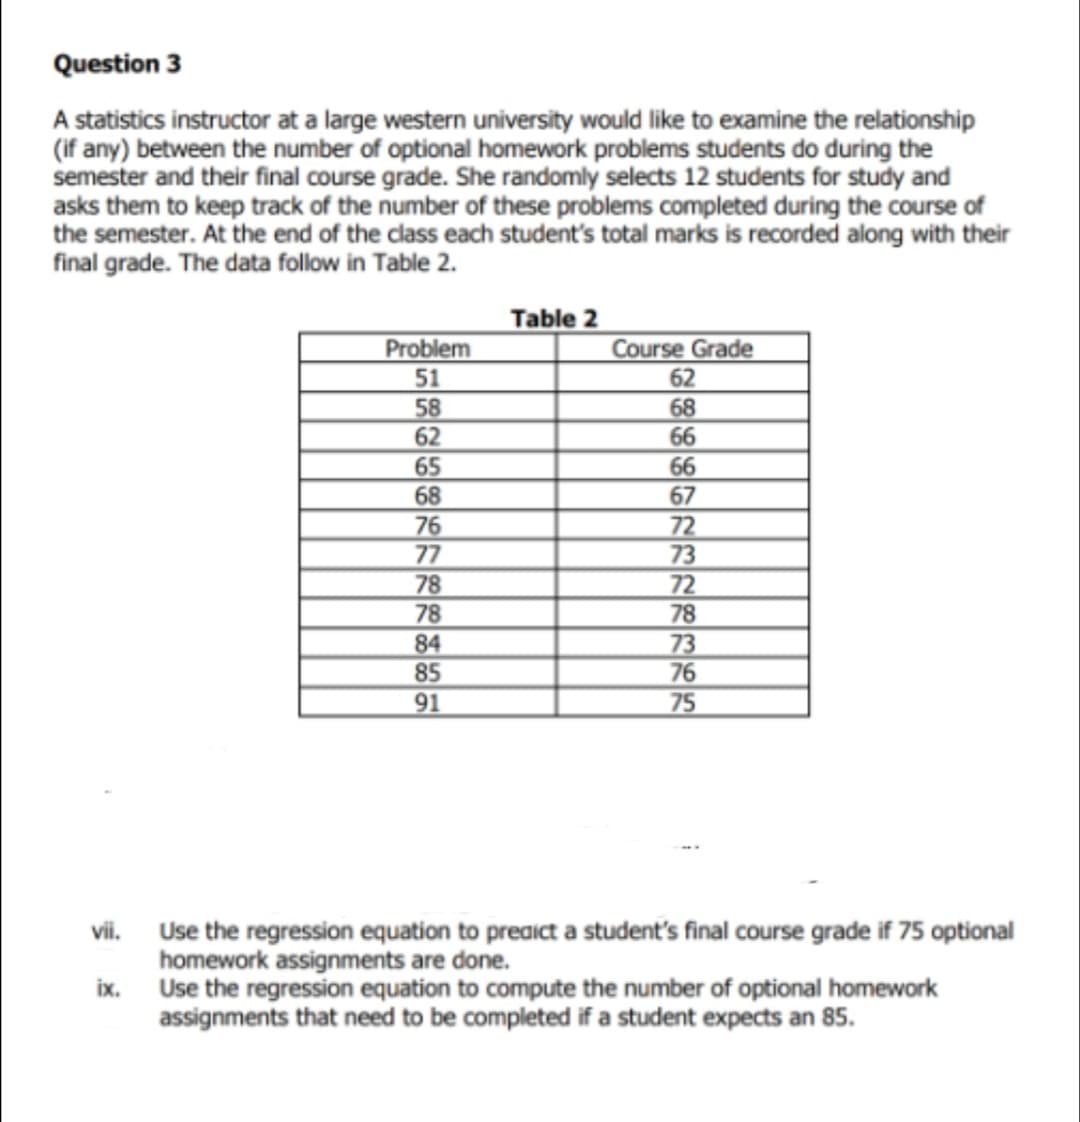 Question 3
A statistics instructor at a large western university would like to examine the relationship
(if any) between the number of optional homework problems students do during the
semester and their final course grade. She randomly selects 12 students for study and
asks them to keep track of the number of these problems completed during the course of
the semester. At the end of the class each student's total marks is recorded along with their
final grade. The data follow in Table 2.
Table 2
Problem
Course Grade
62
51
58
62
68
66
65
68
76
77
66
67
72
73
72
78
73
76
78
78
84
85
91
75
Use the regression equation to preaict a student's final course grade if 75 optional
homework assignments are done.
ix. Use the regression equation to compute the number of optional homework
assignments that need to be completed if a student expects an 85.
vii.
